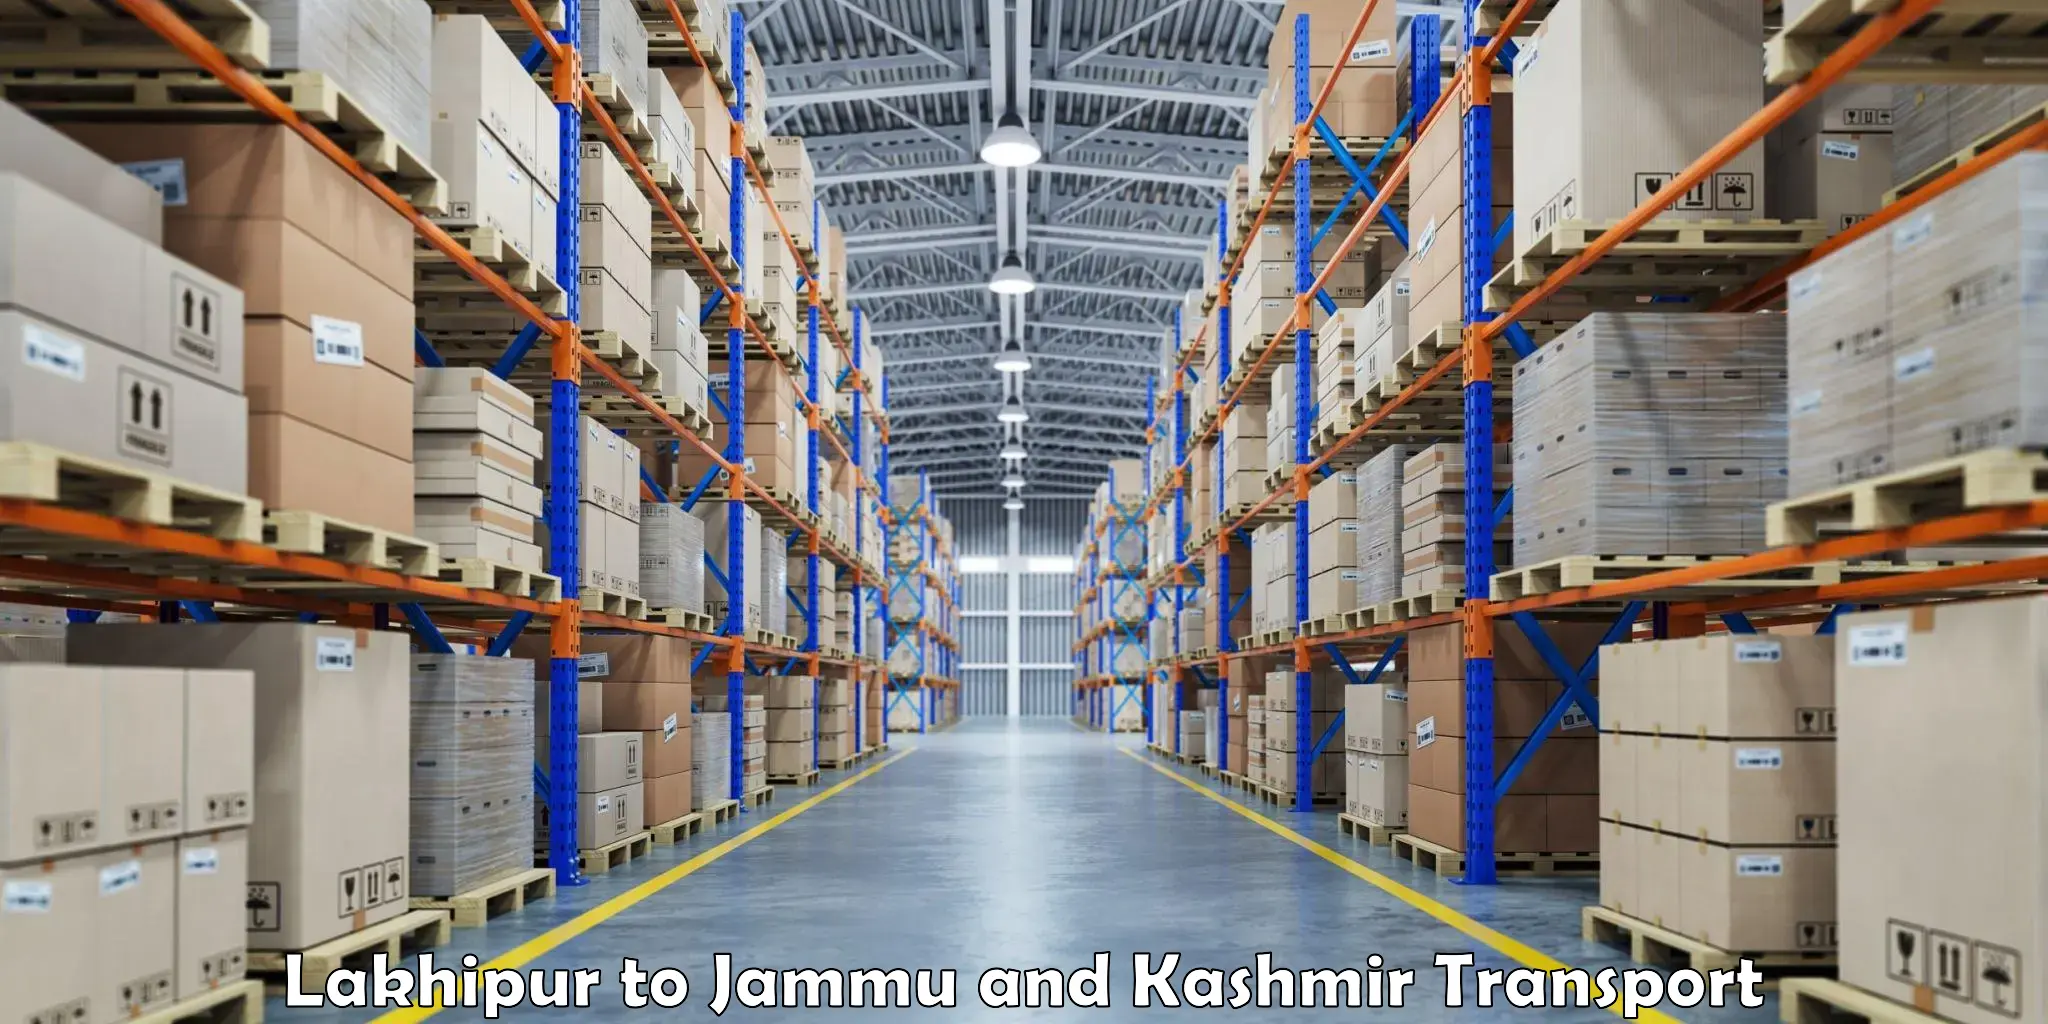 Delivery service Lakhipur to Shopian